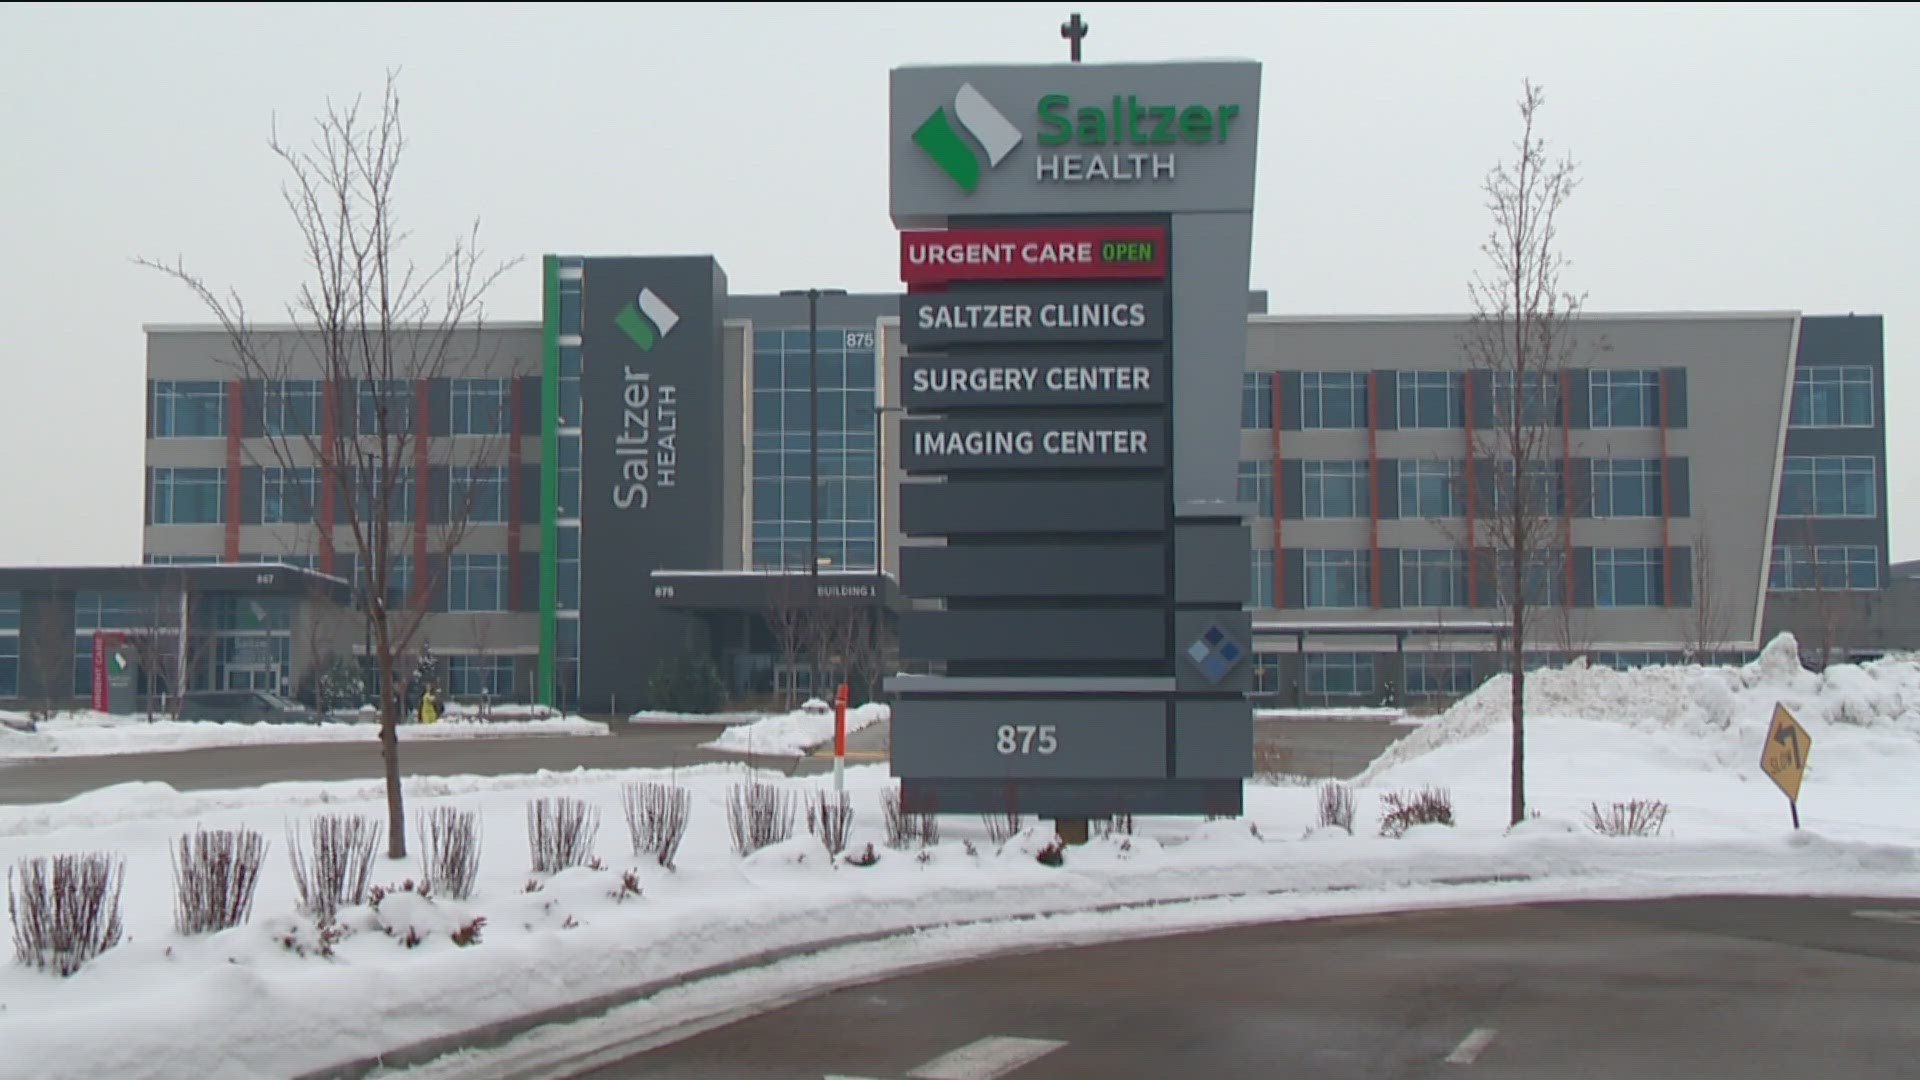 Saltzer Health is set to close or sell its 11 locations in Ada and Canyon counties by March 29. The organization serves just under 80,000 patients each year.